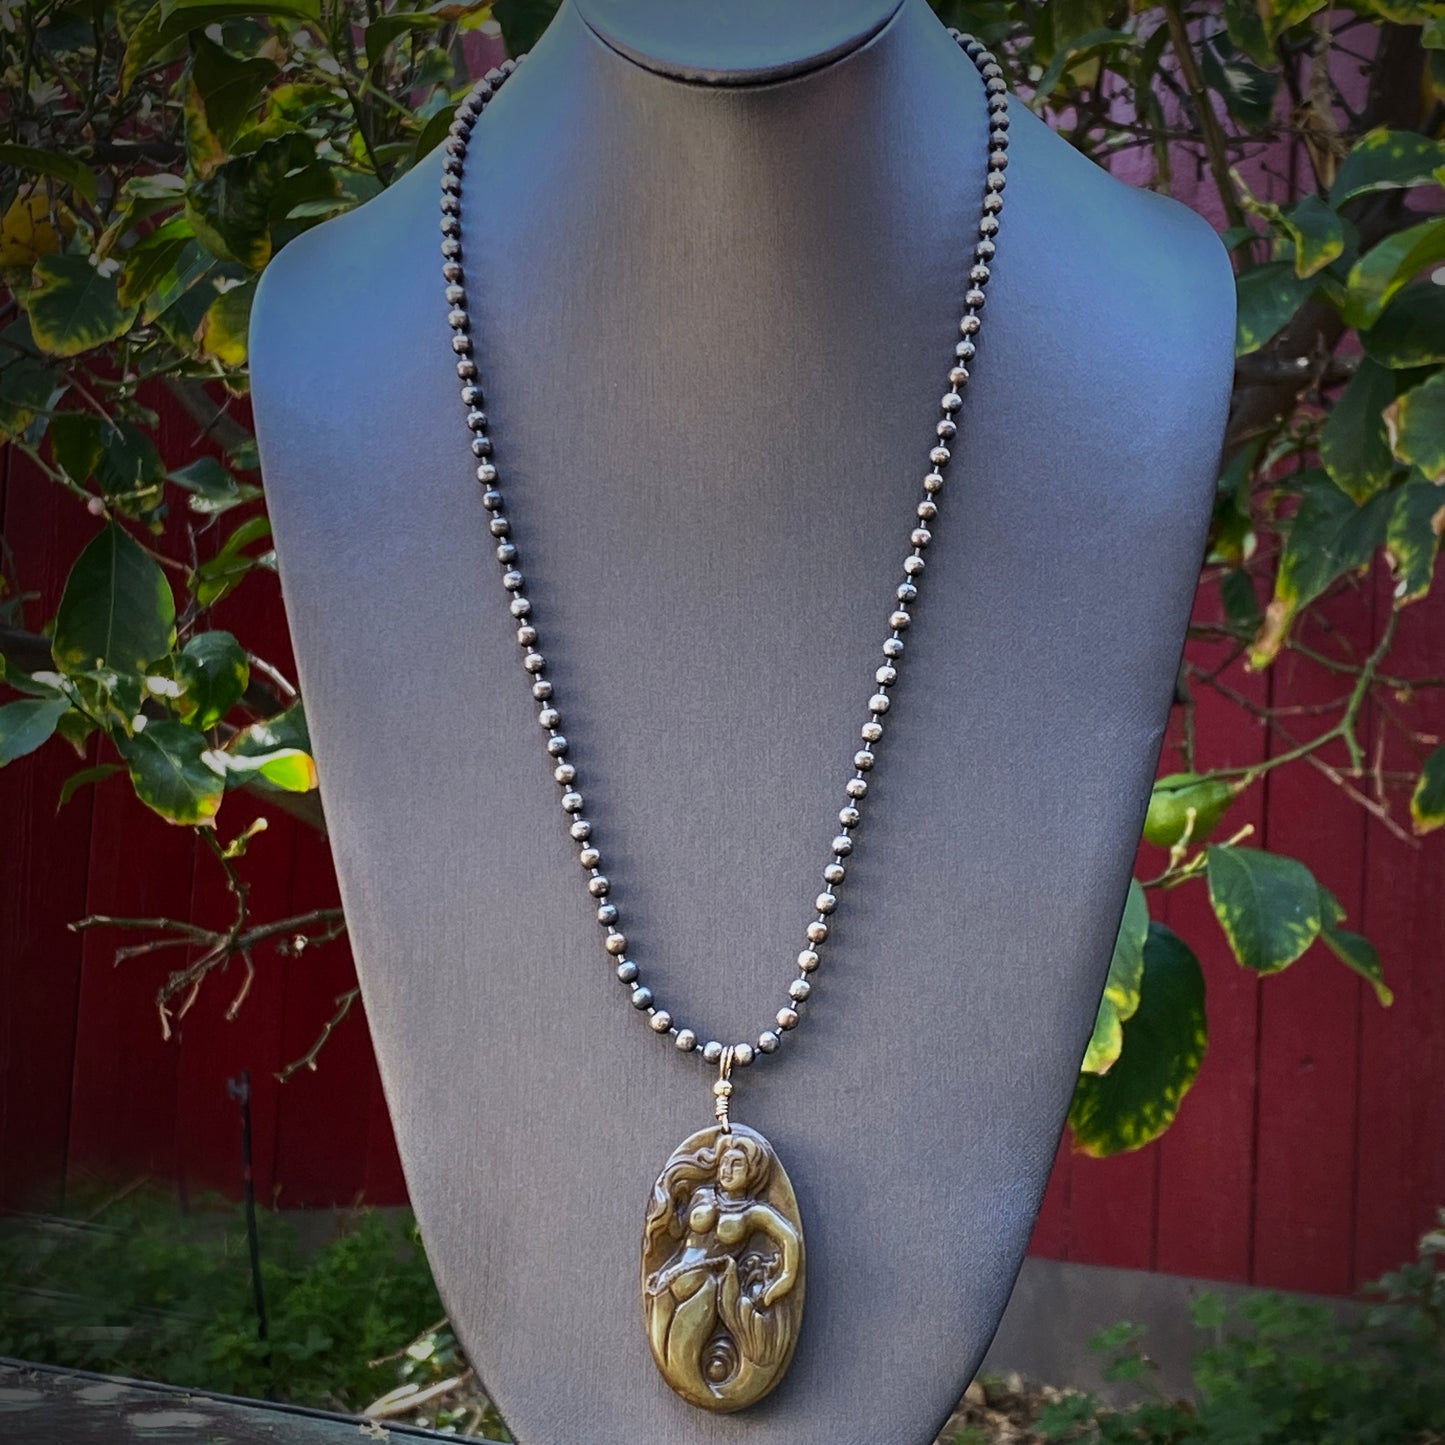 Jade Gemstone Carved Mermaid Pendant Hand Wrapped on Copper Chain